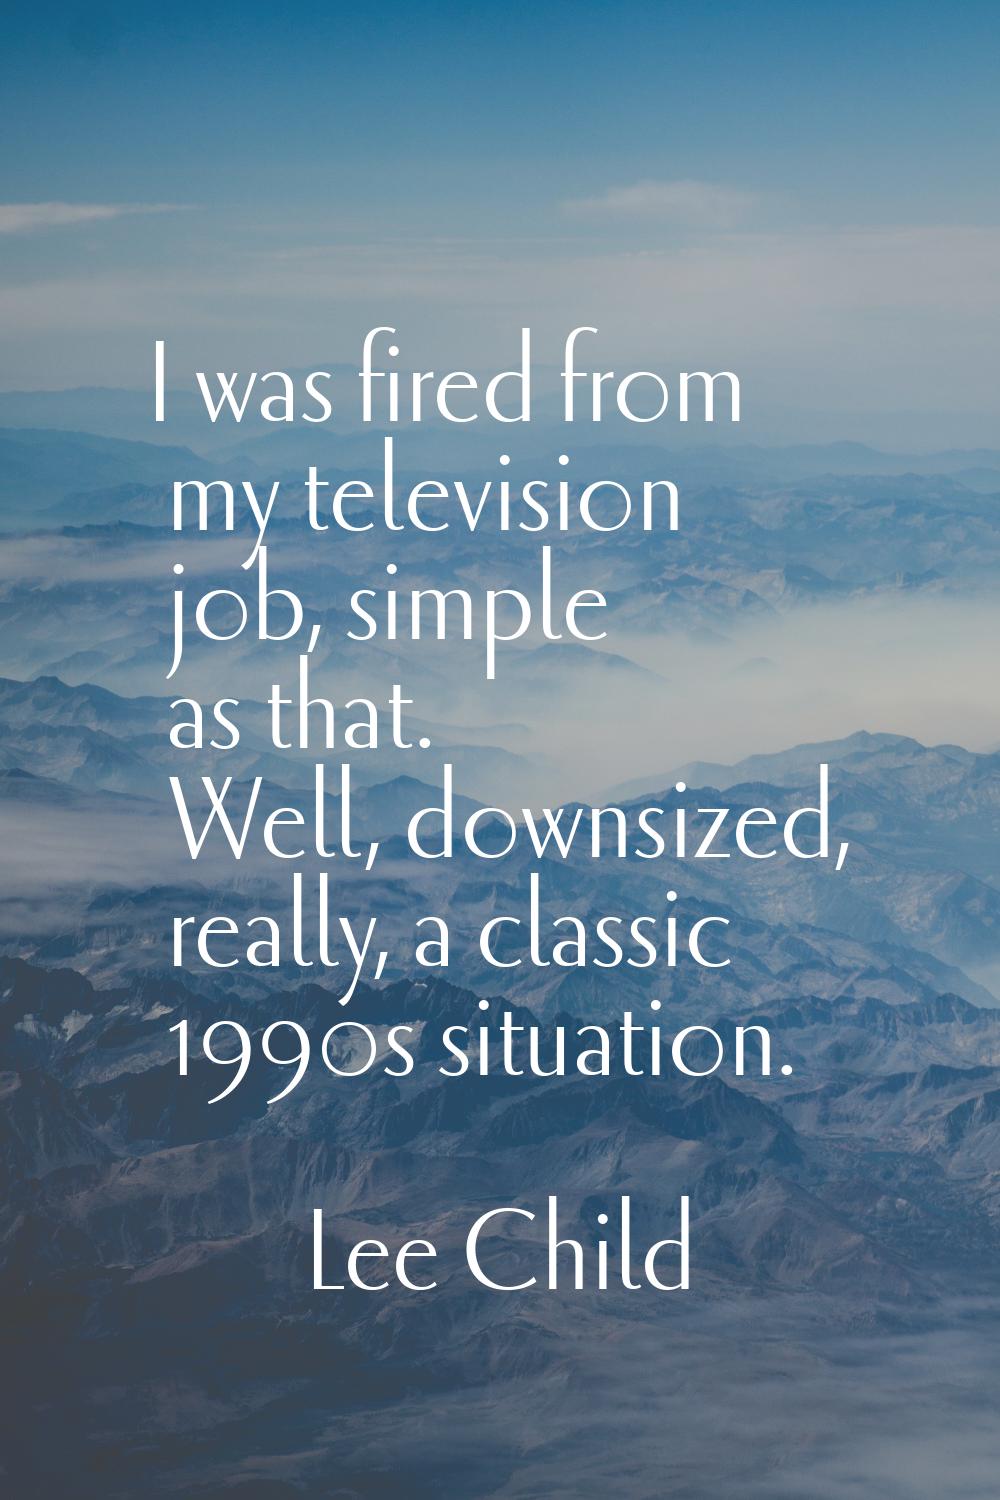 I was fired from my television job, simple as that. Well, downsized, really, a classic 1990s situat